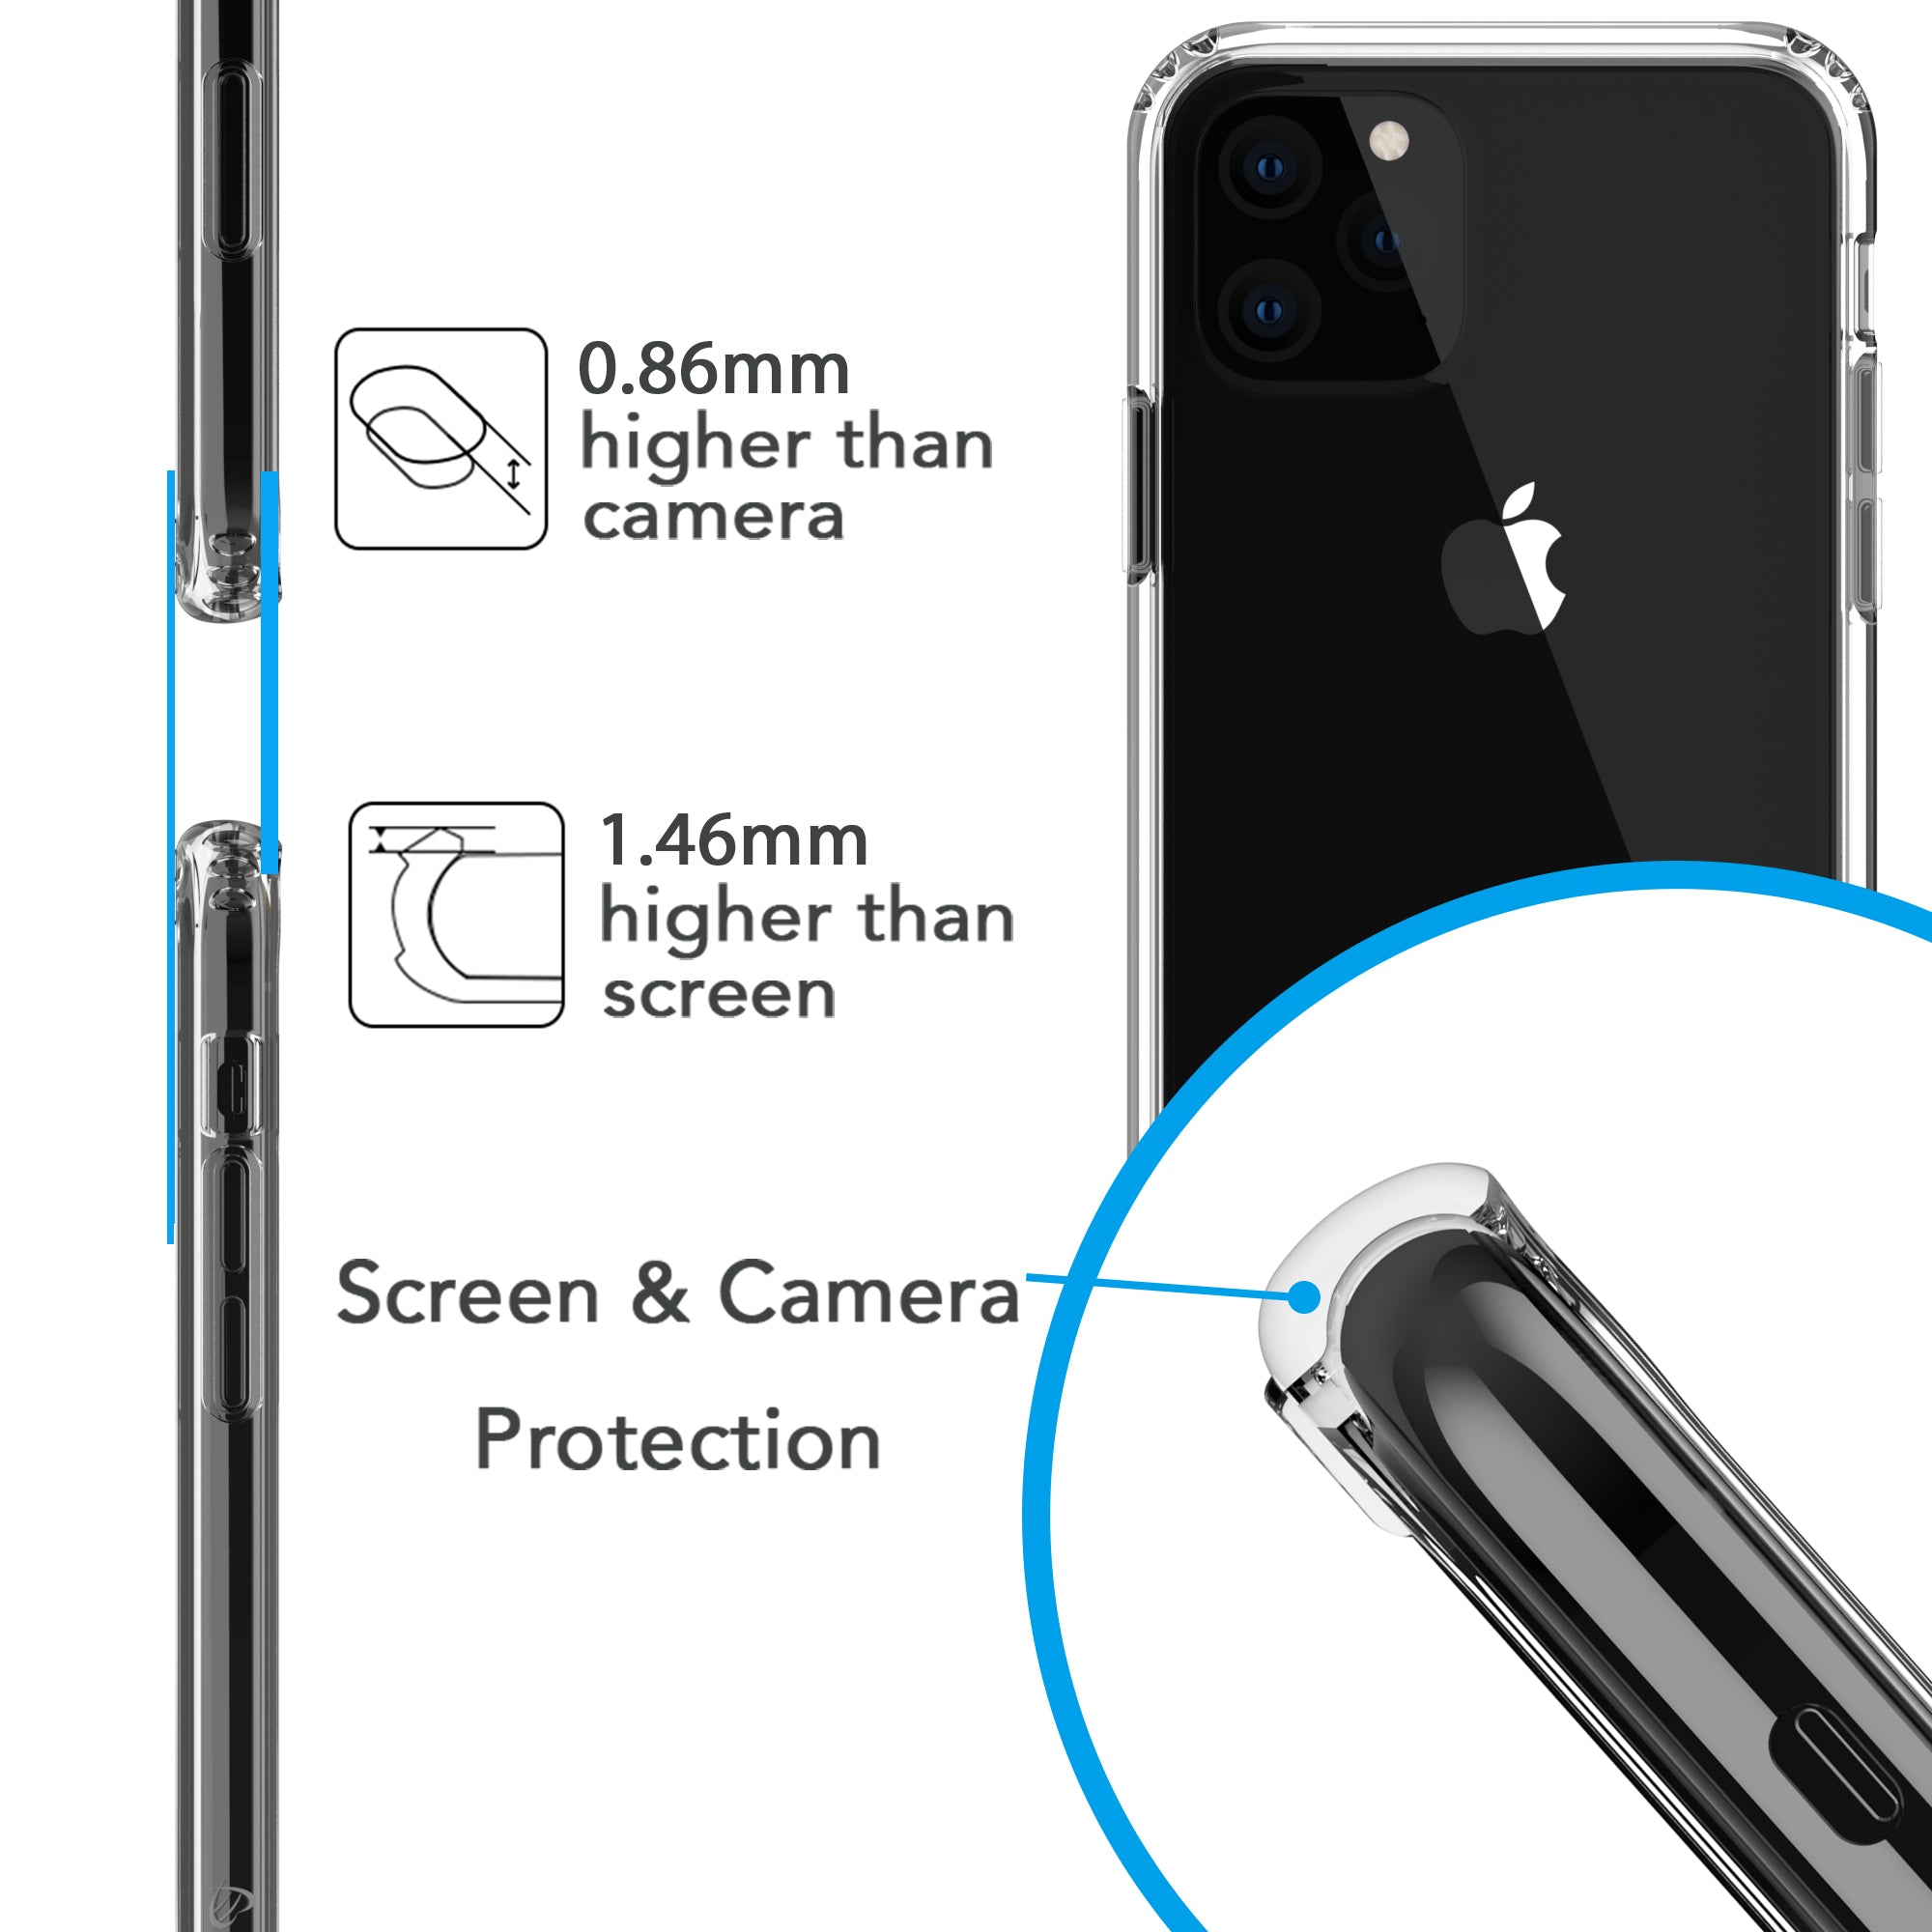 Luvvitt Clear View Case and Tempered Glass Screen Protector Bundle for iPhone 11 Pro Max 2019